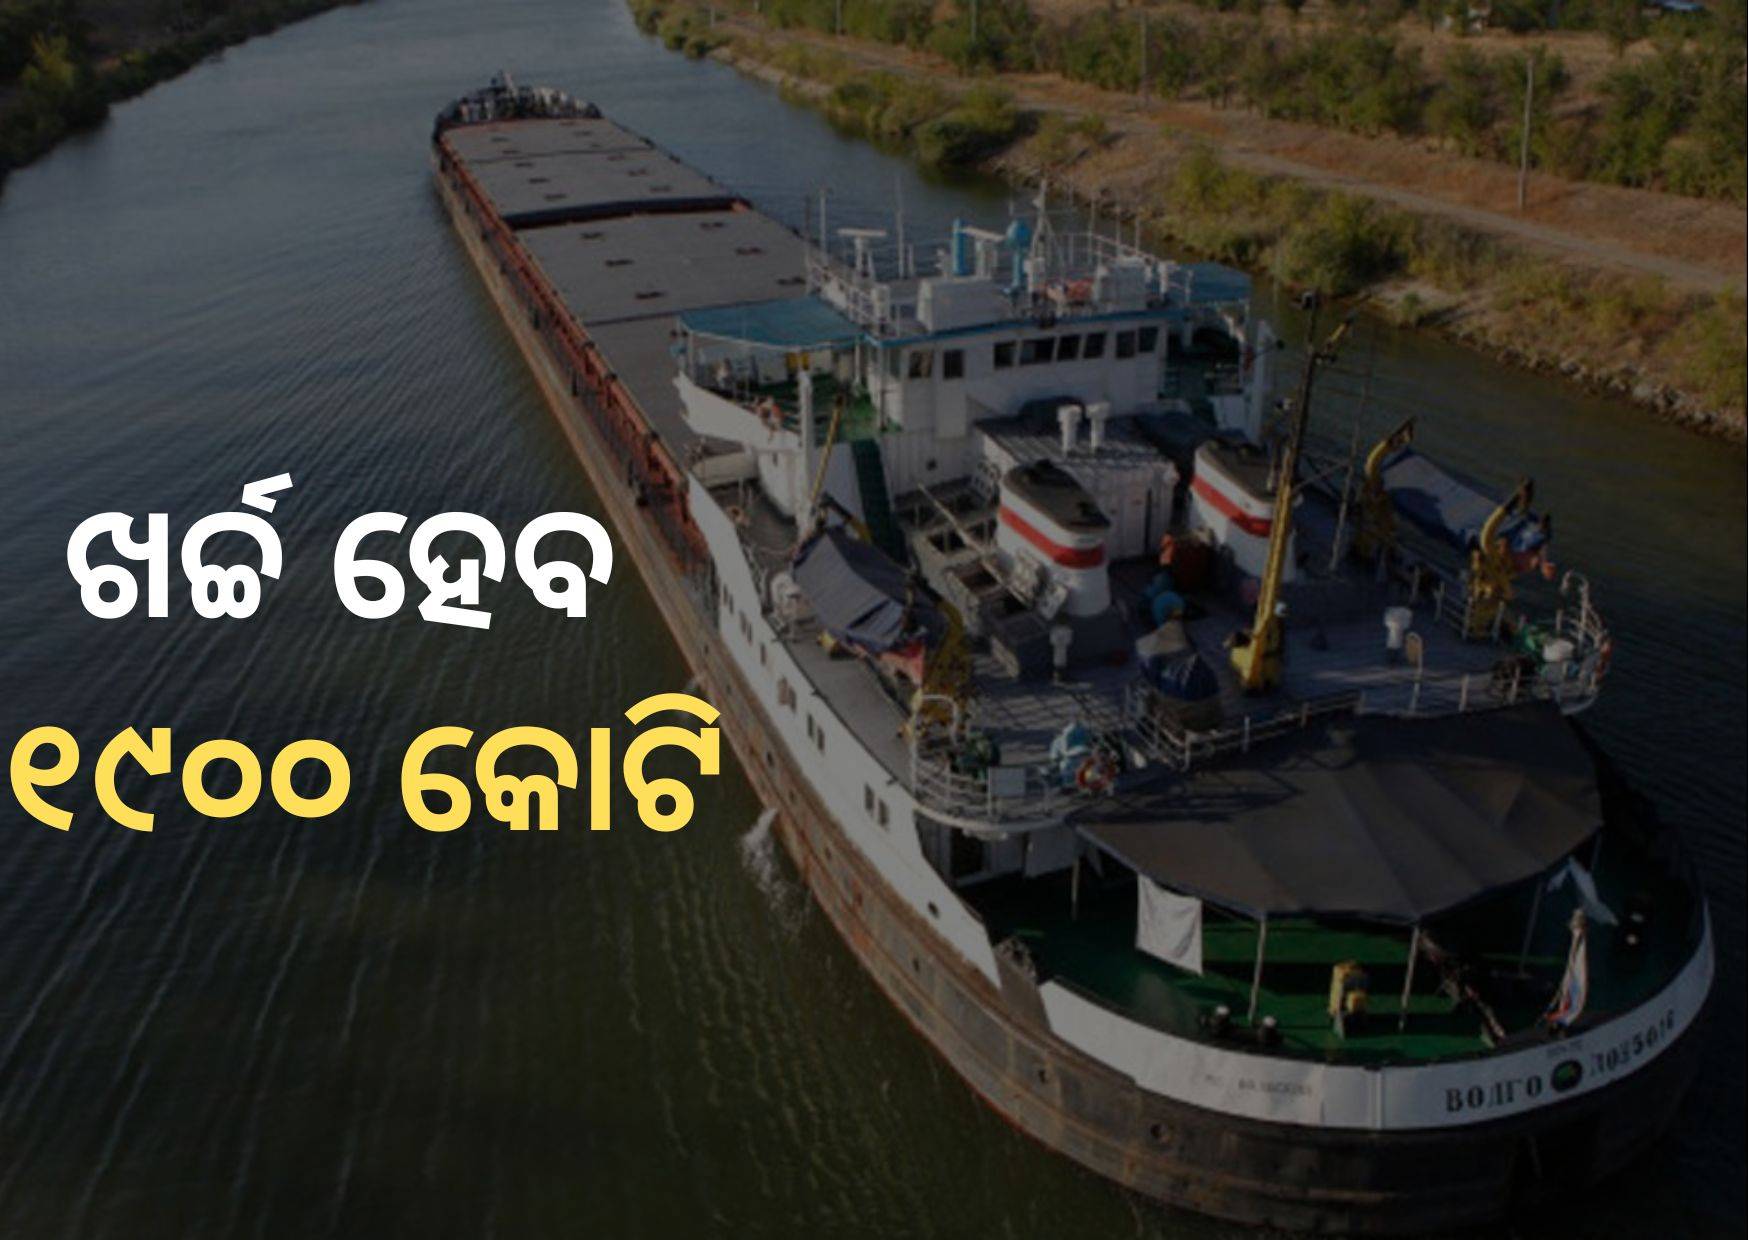 Ro-Pax ferry service are being developed in 45 places of the country, including 2 in Odisha